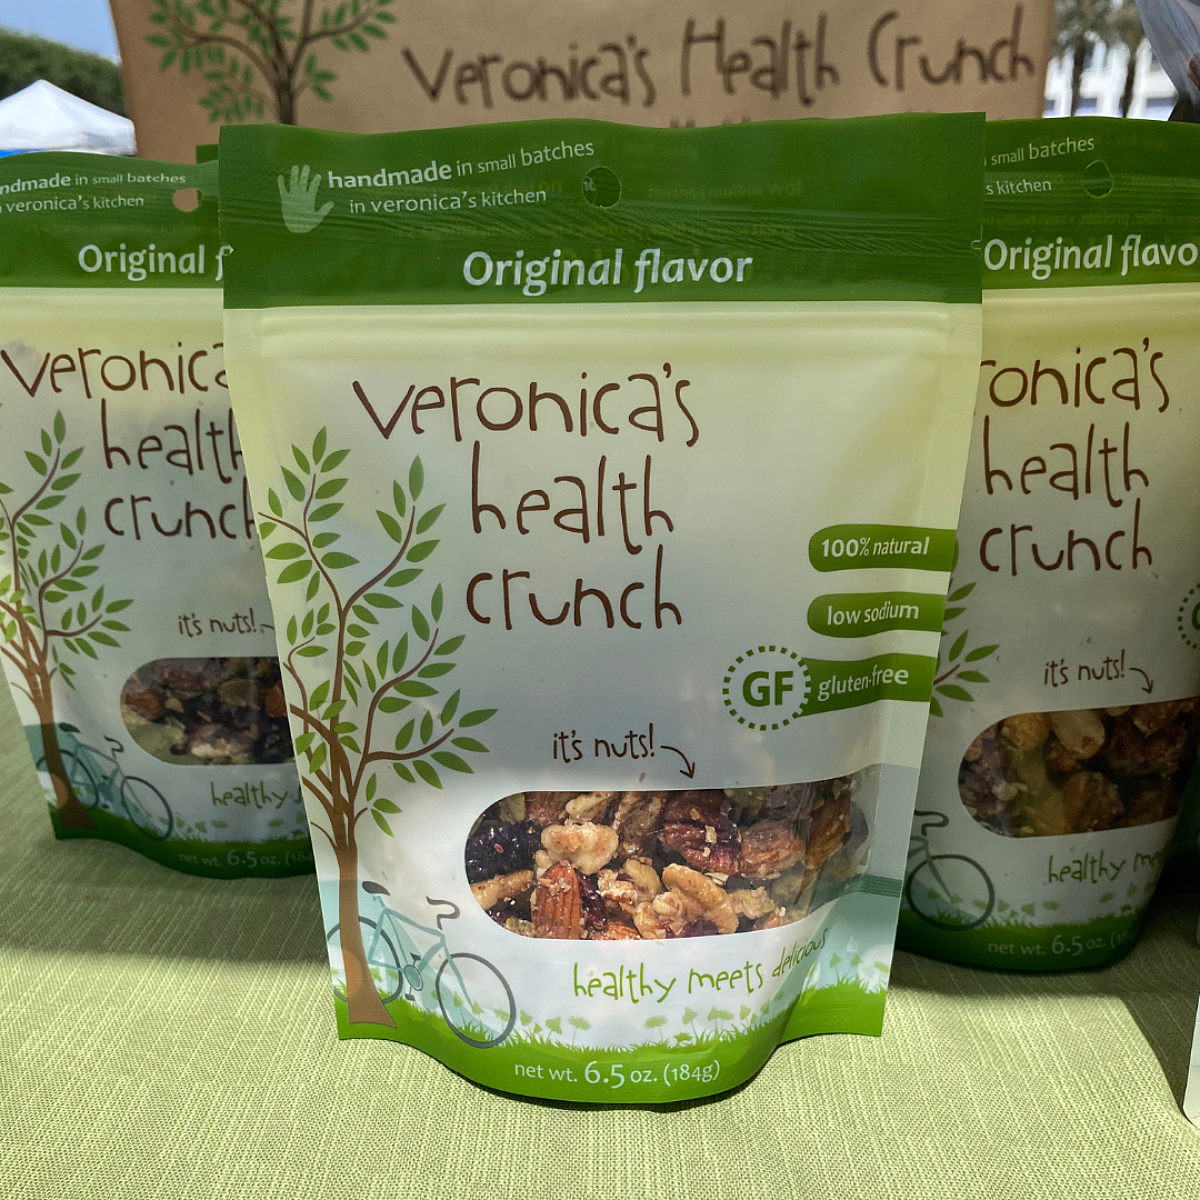 Veronica´s health crunch at the Seaside Farmers Market